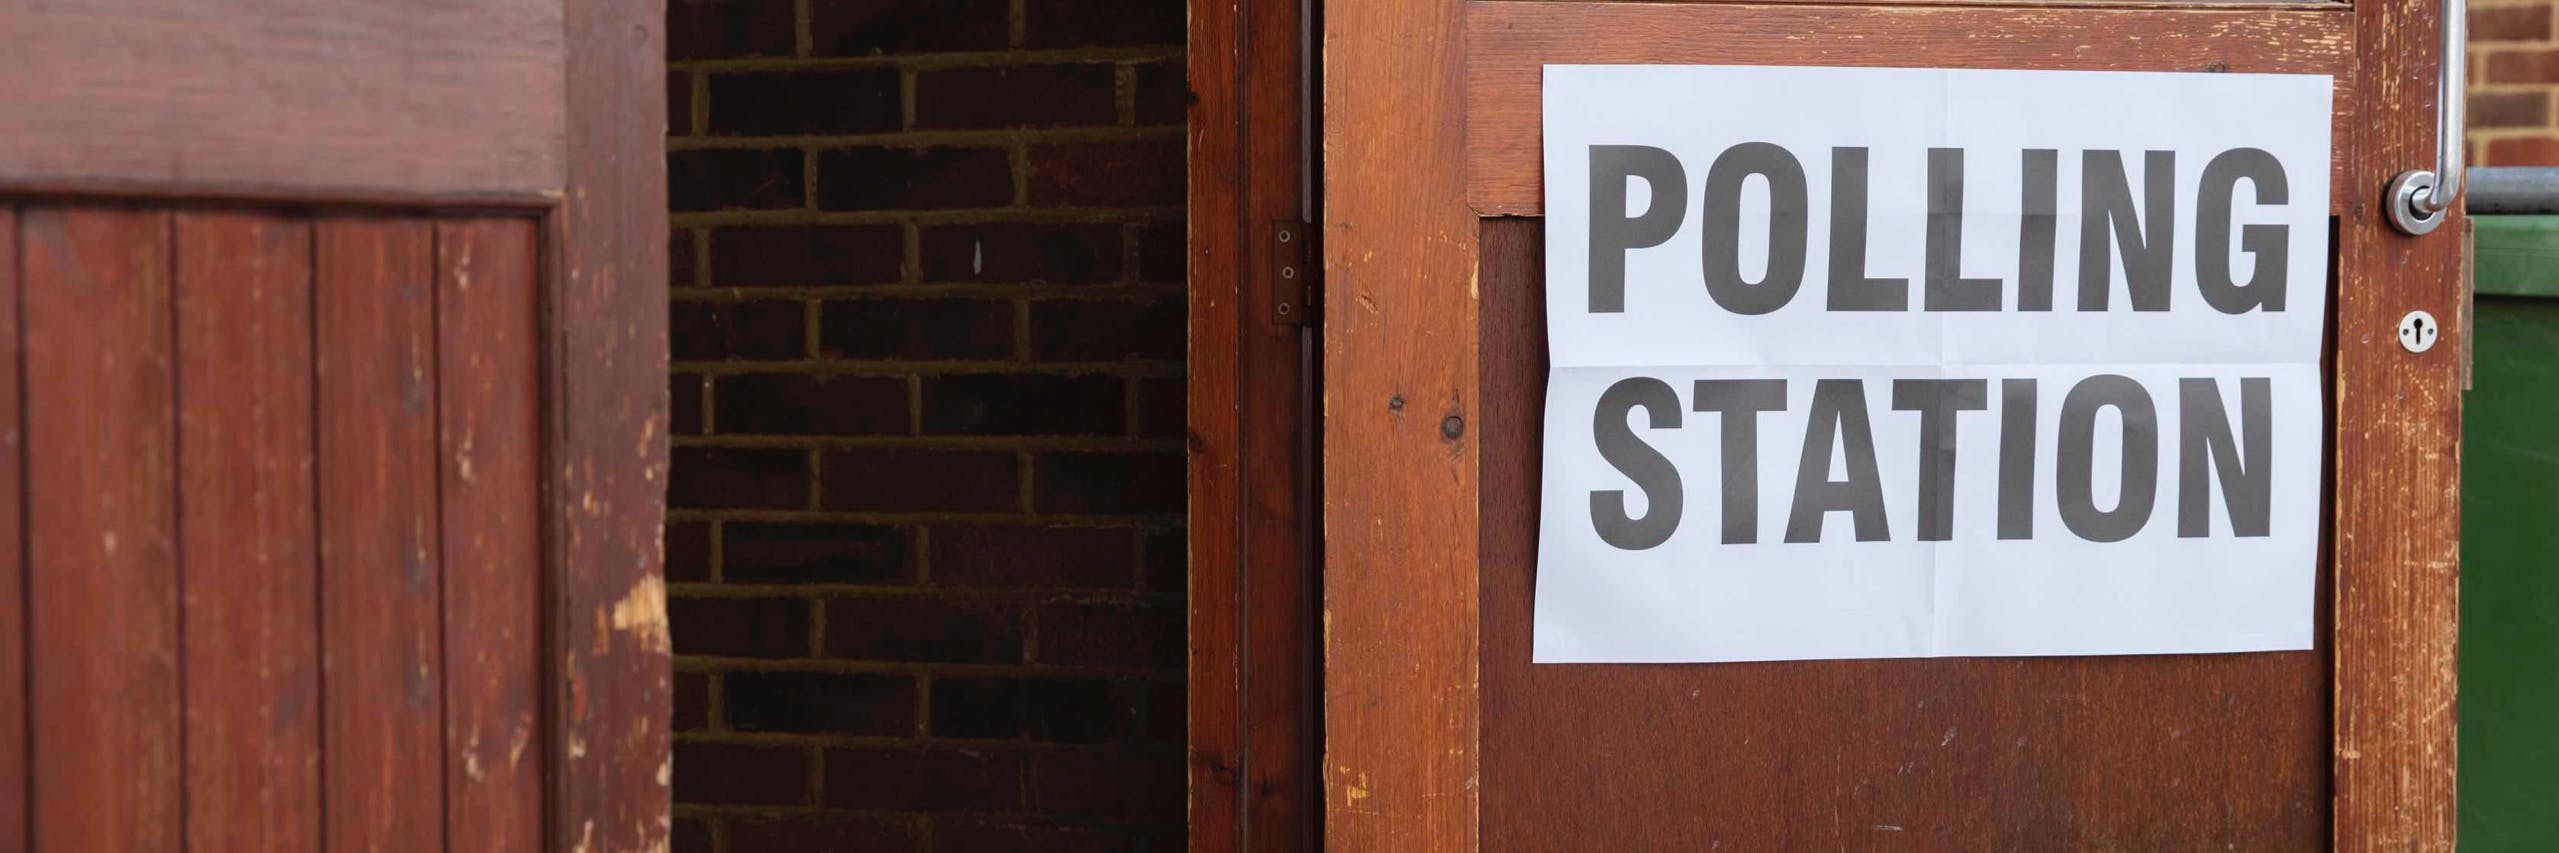 Polling Station poster stuck on an open wooden door at a polling station